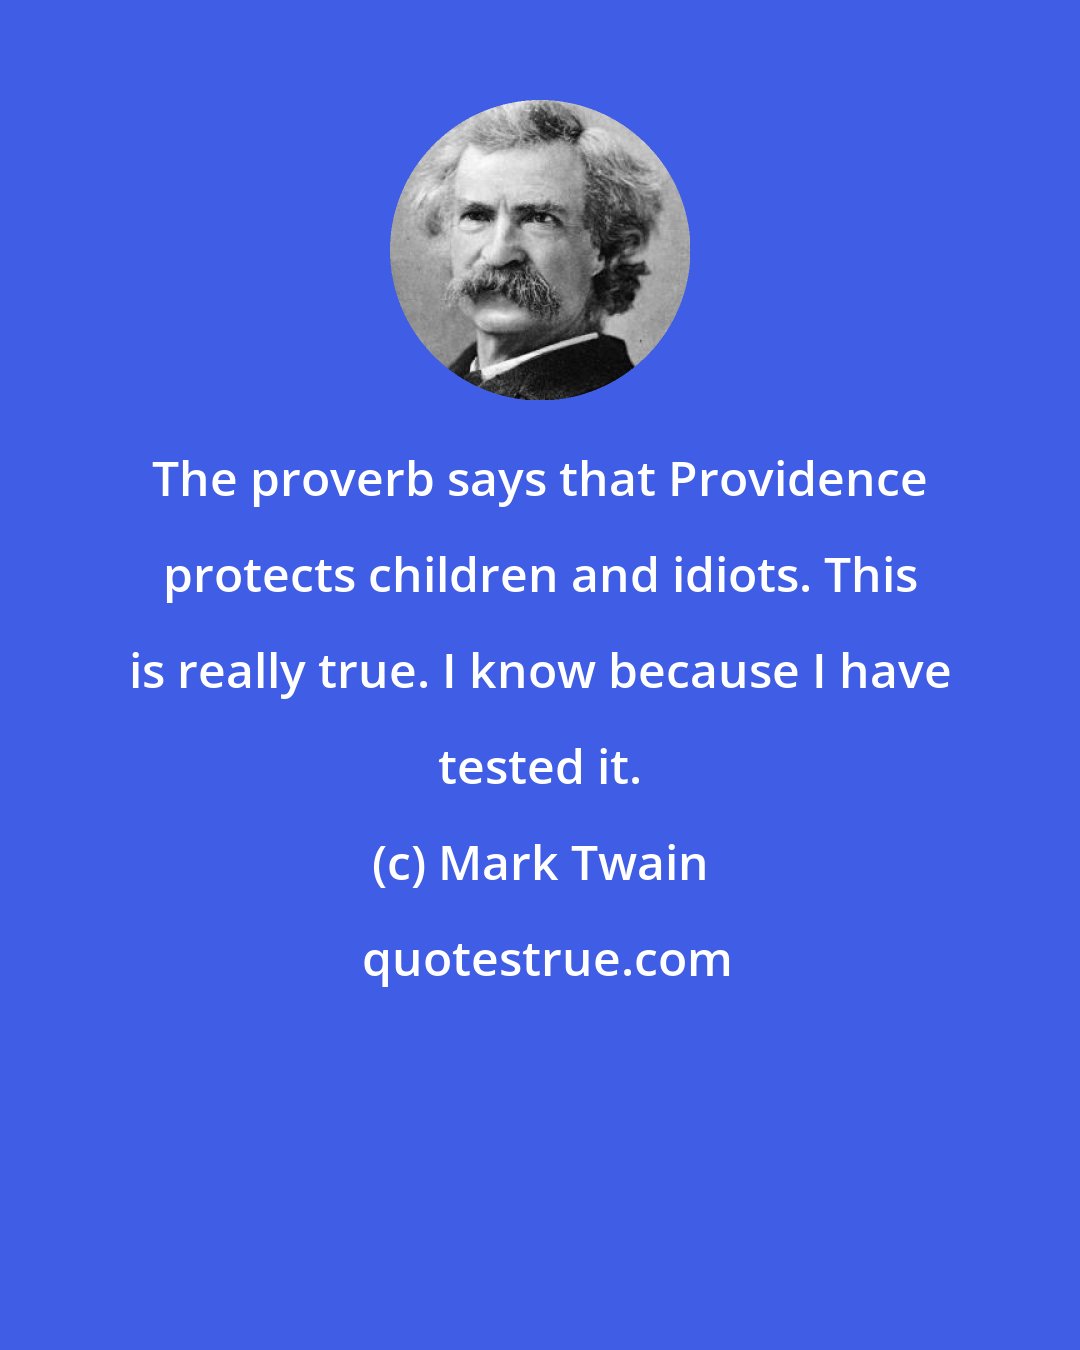 Mark Twain: The proverb says that Providence protects children and idiots. This is really true. I know because I have tested it.